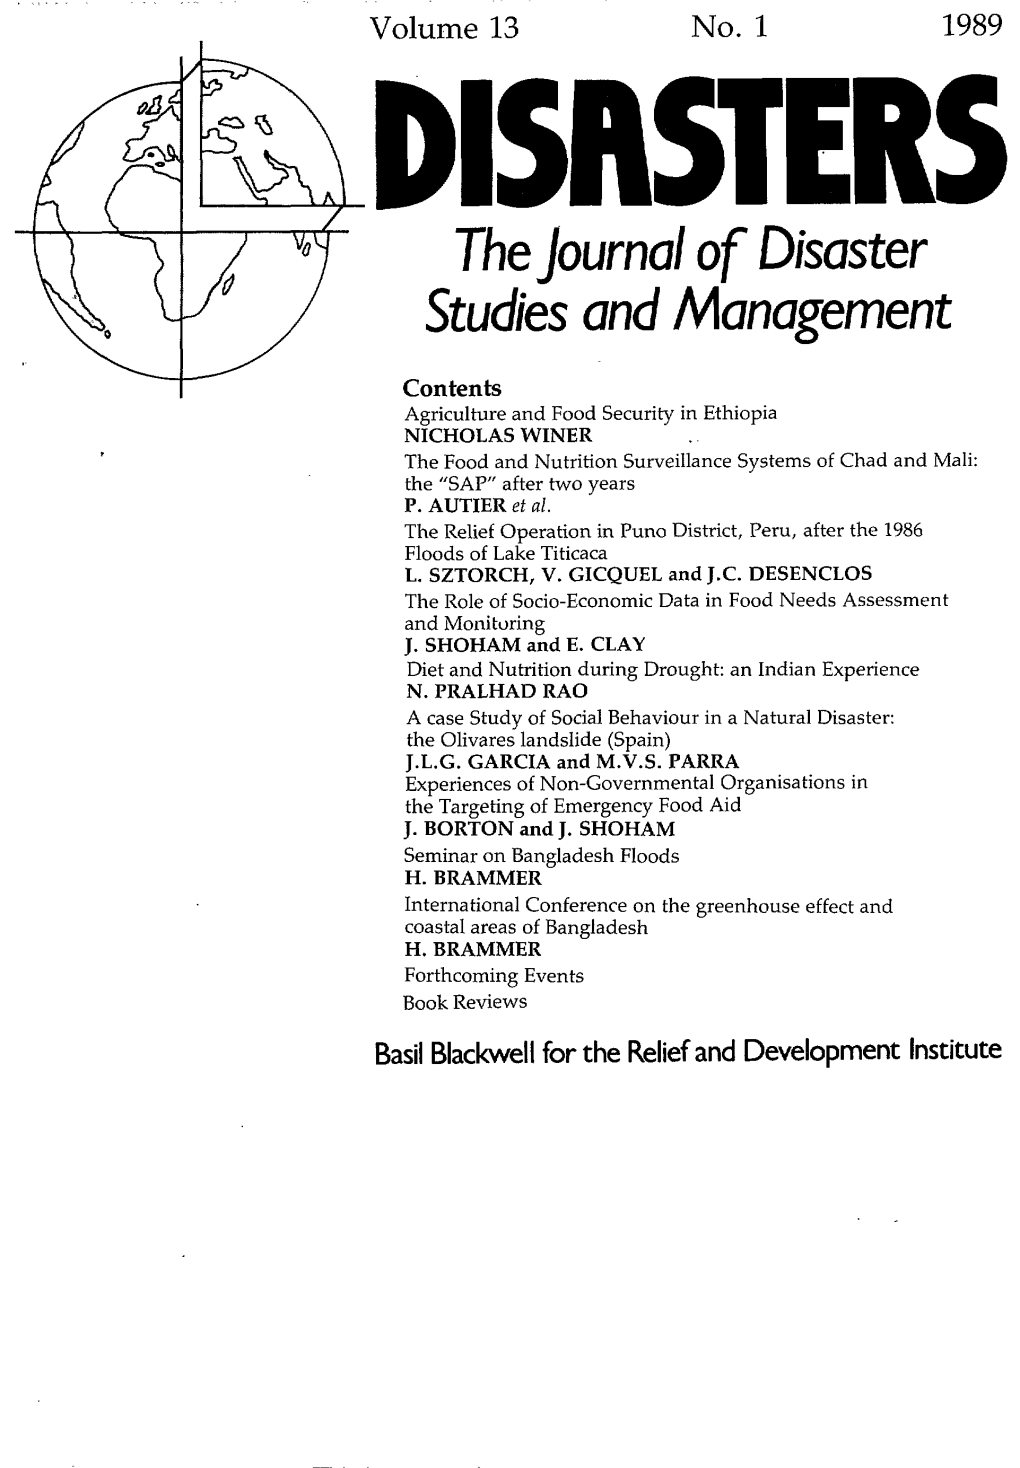 The Journal of Disaster Studies and Management